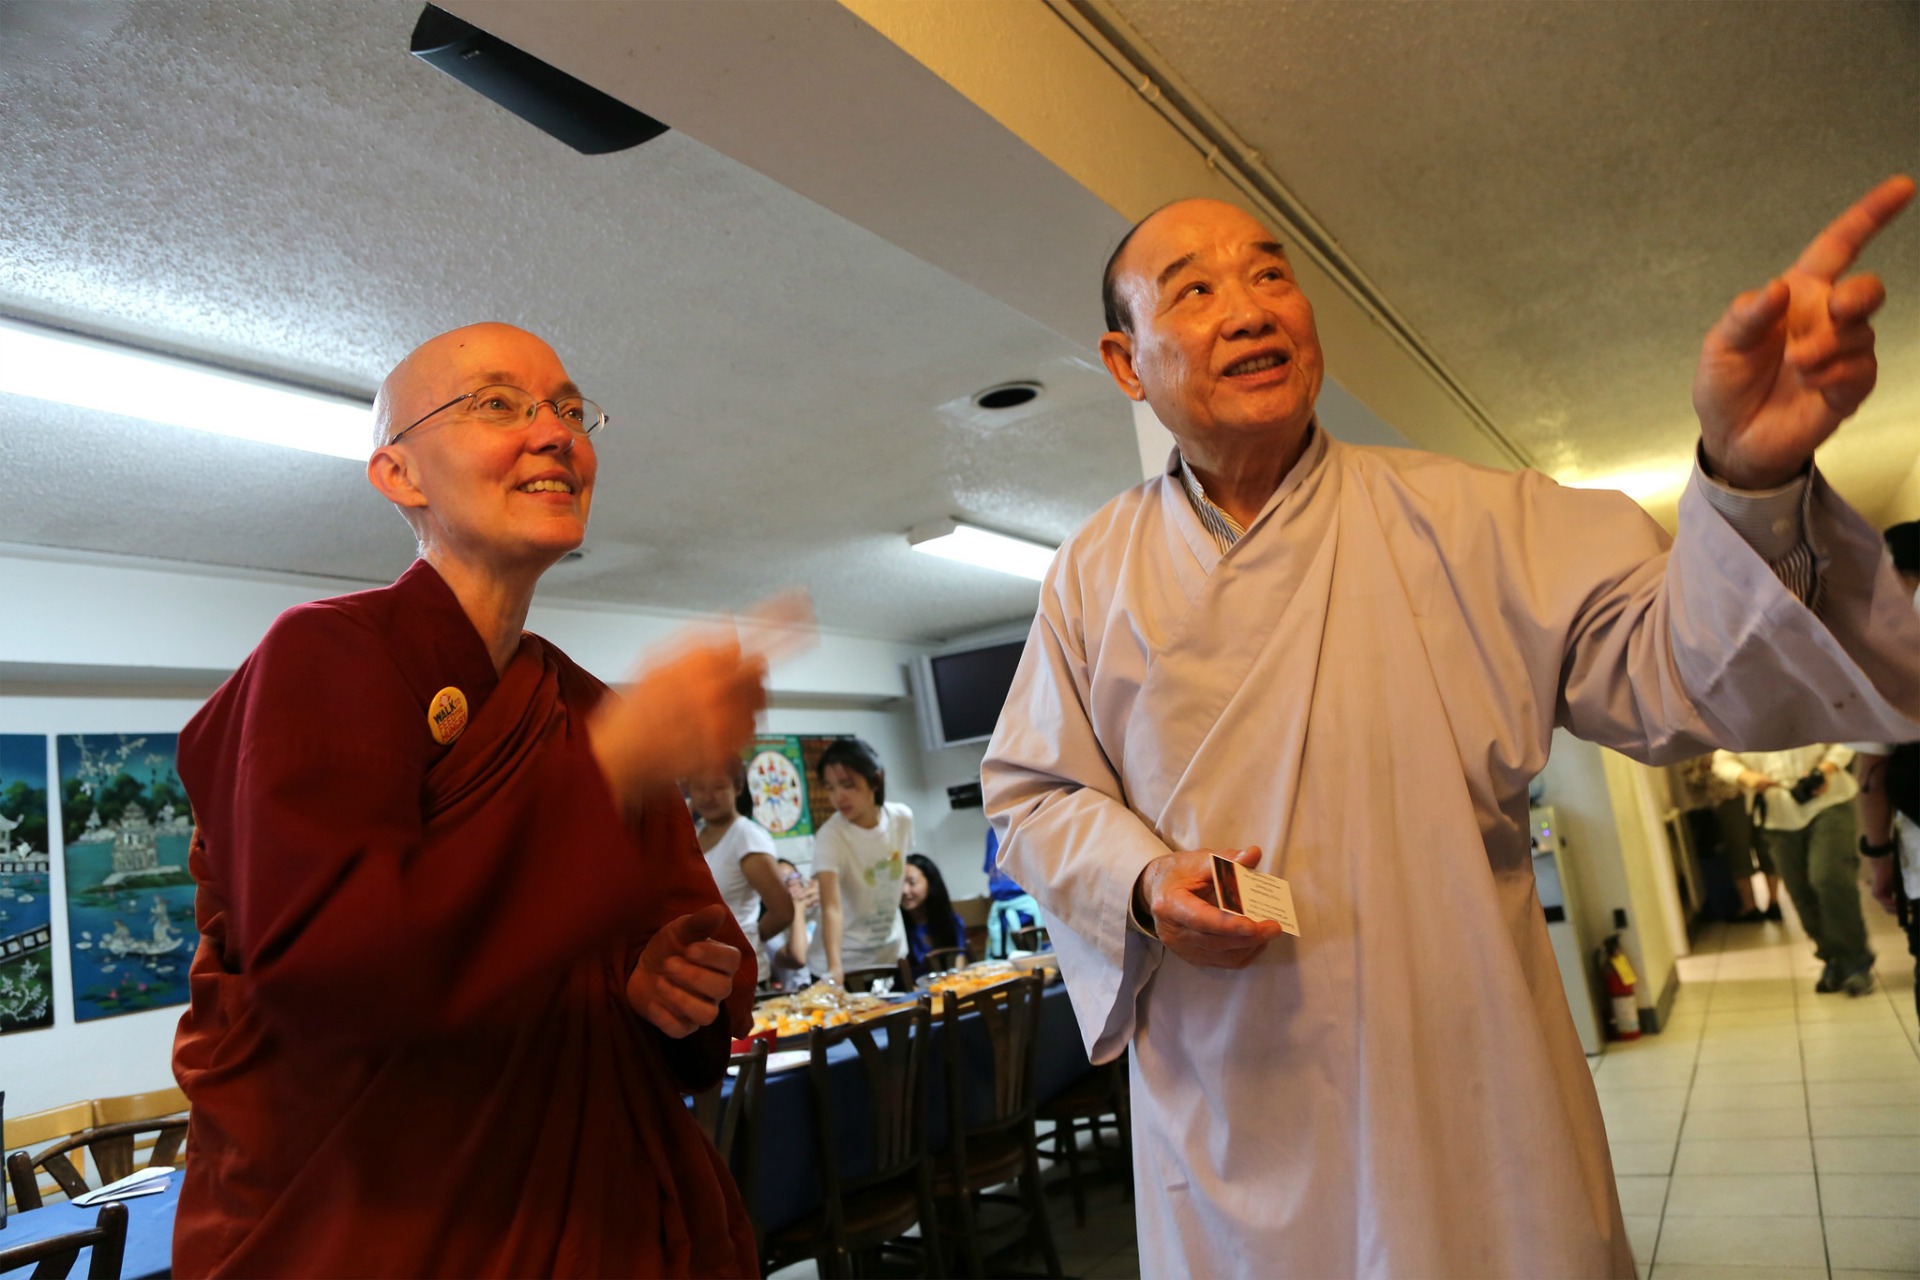 At Từ Quang Temple, walk leader Ayya Santussika Bhikkhuni talks to one of the original temple founders, Minh Huynh